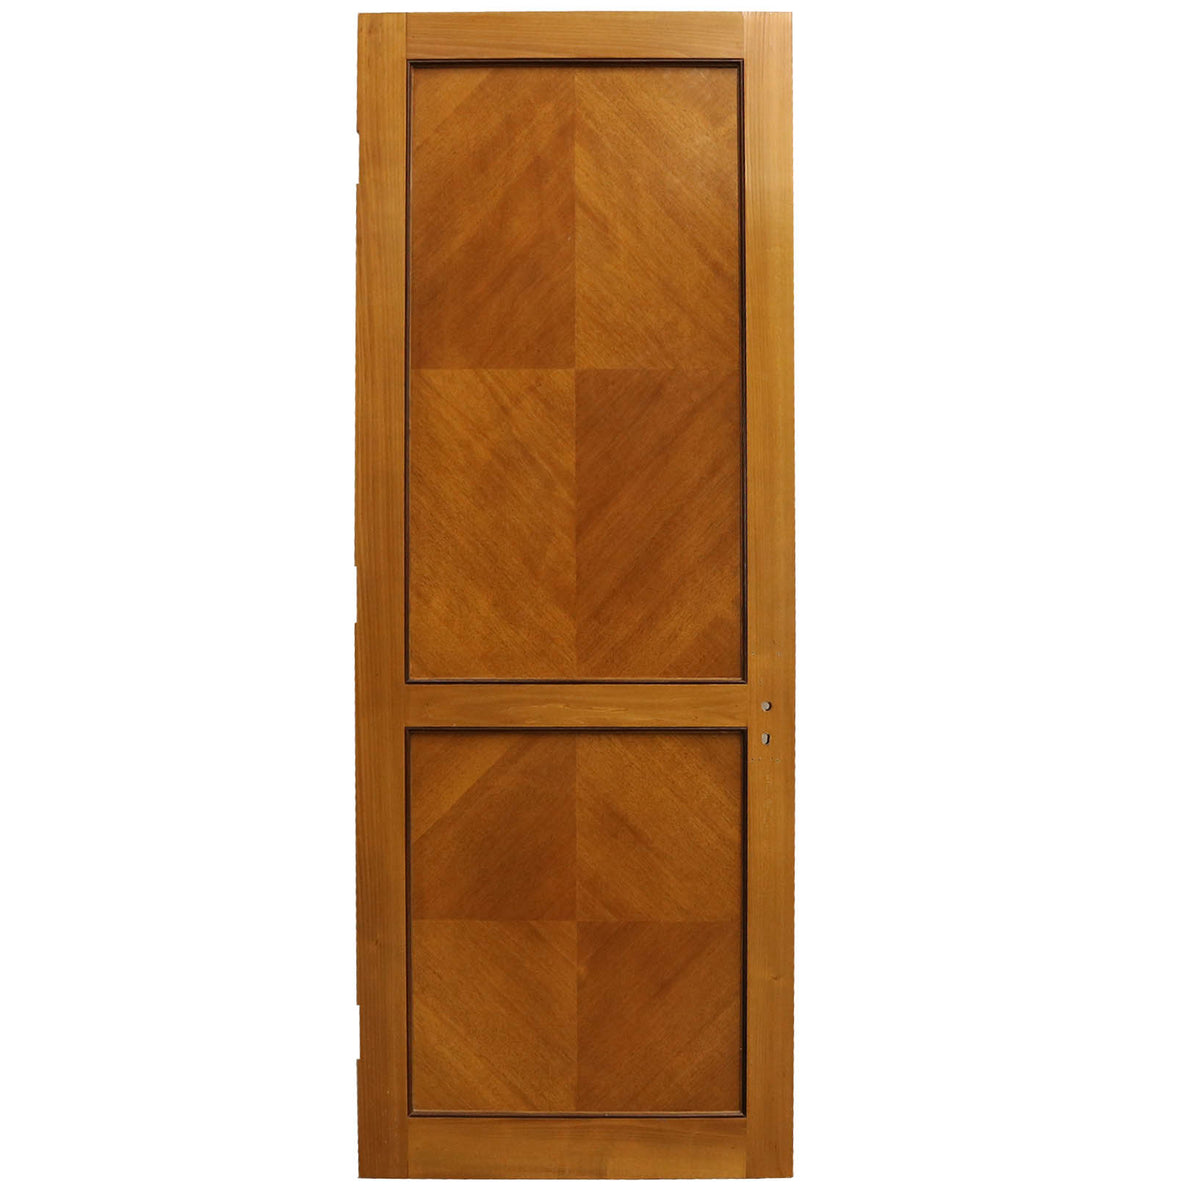 Reclaimed Solid Tulip Wood Two Panel Door - 222cm x 82.5cm | The Architectural Forum